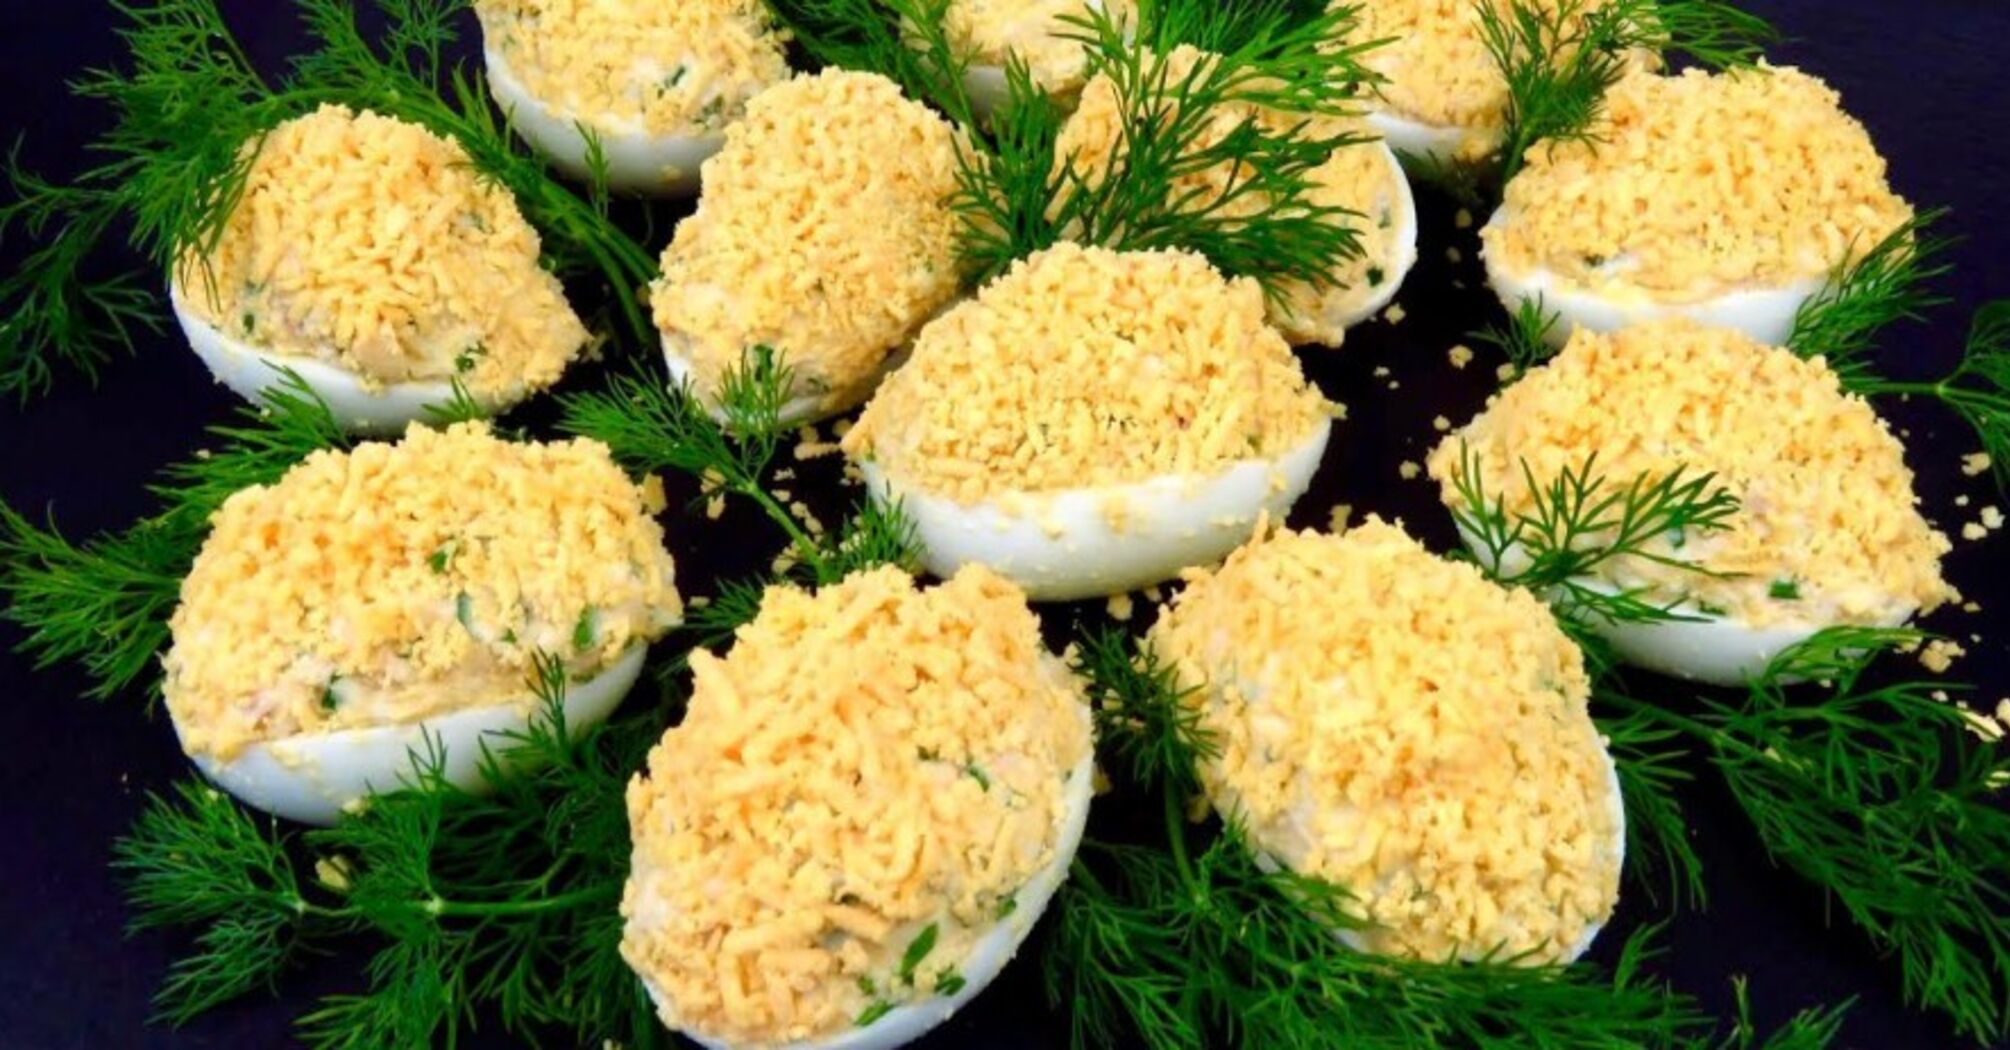 Stuffed eggs 'Mimosa': salad and appetizer at the same time